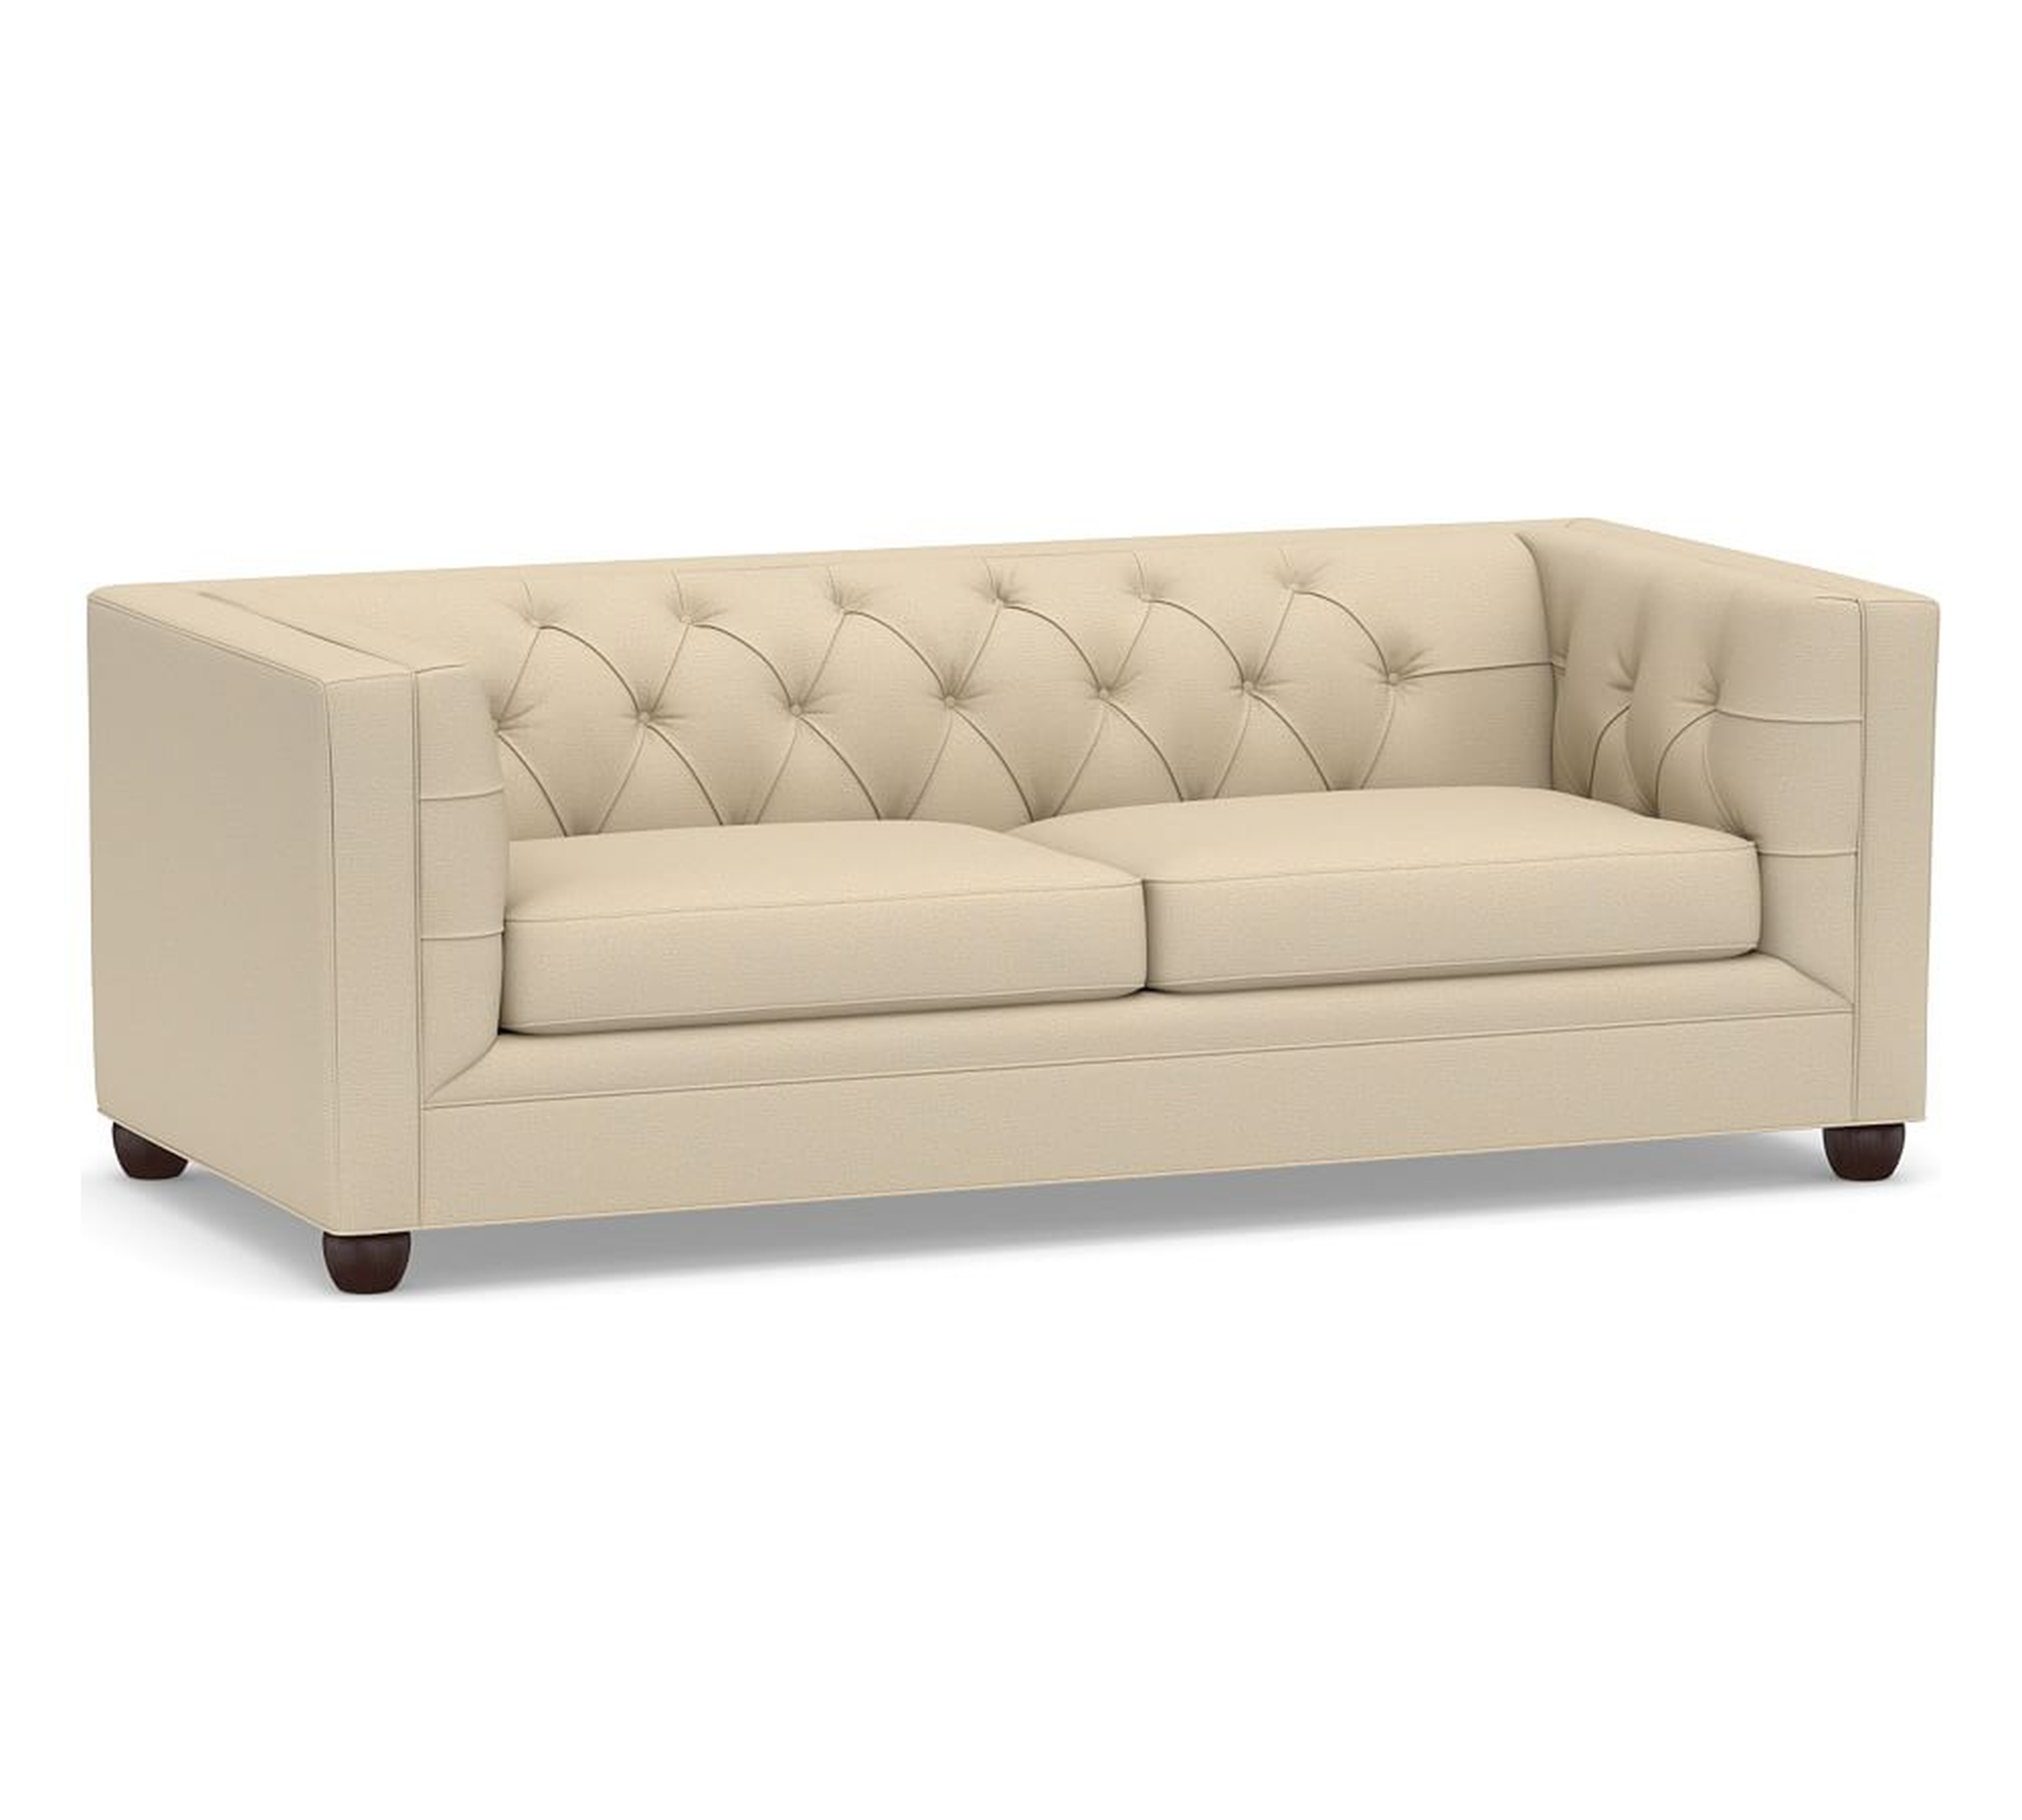 Chesterfield Square Arm Upholstered Sleeper Sofa, Memory Foam Cushions, Park Weave Oatmeal - Pottery Barn